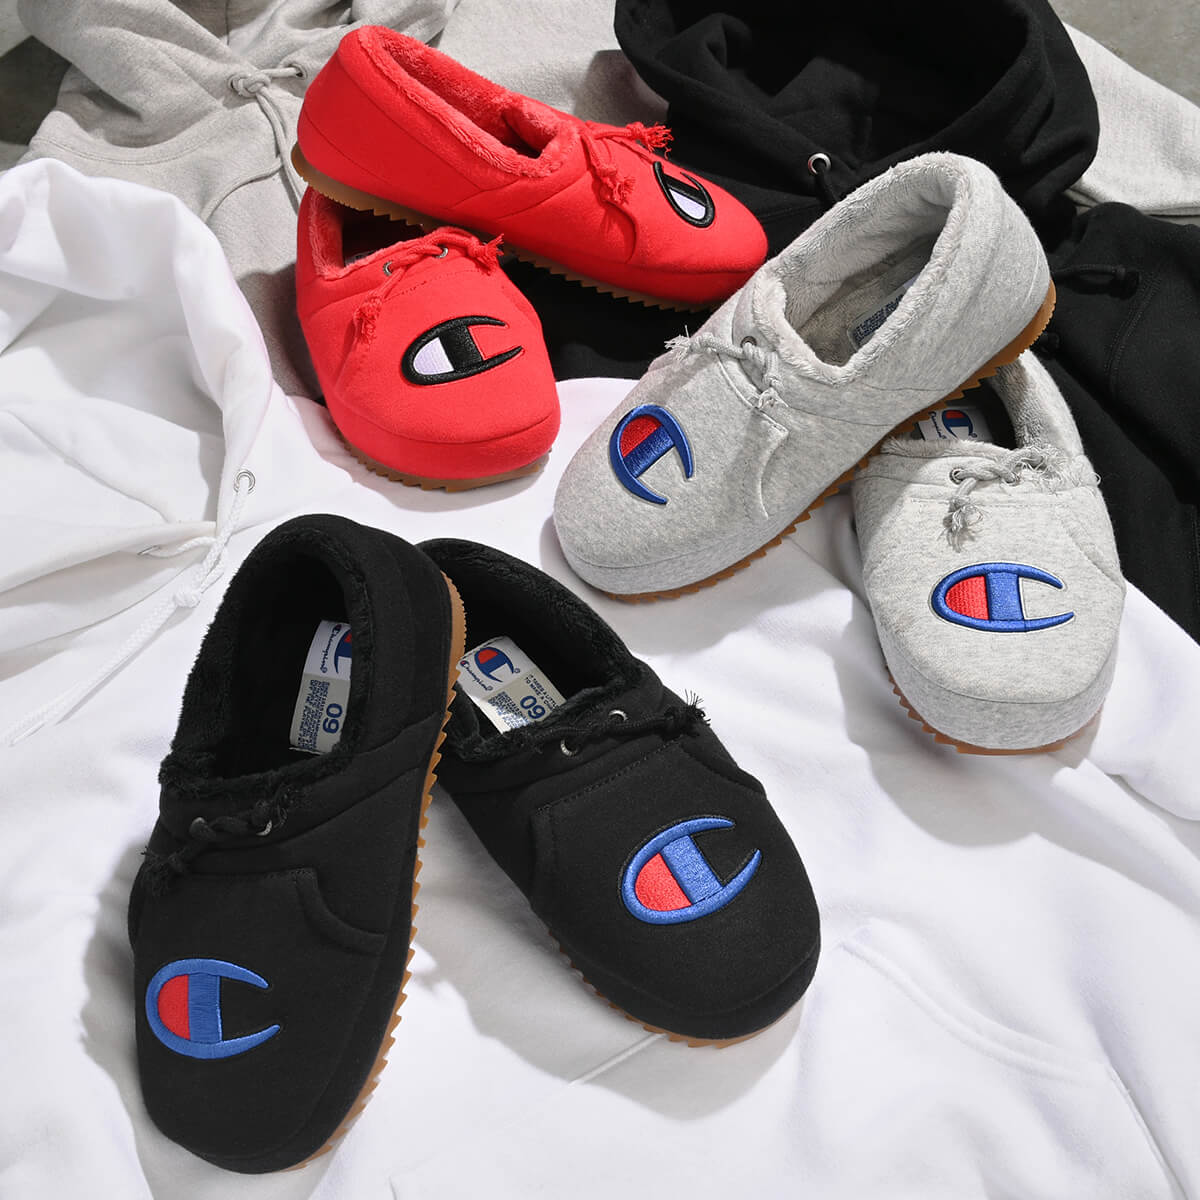 CHAMPION NEW ARRIVALS FEAT. PLUSH SLIPPERS AND MORE